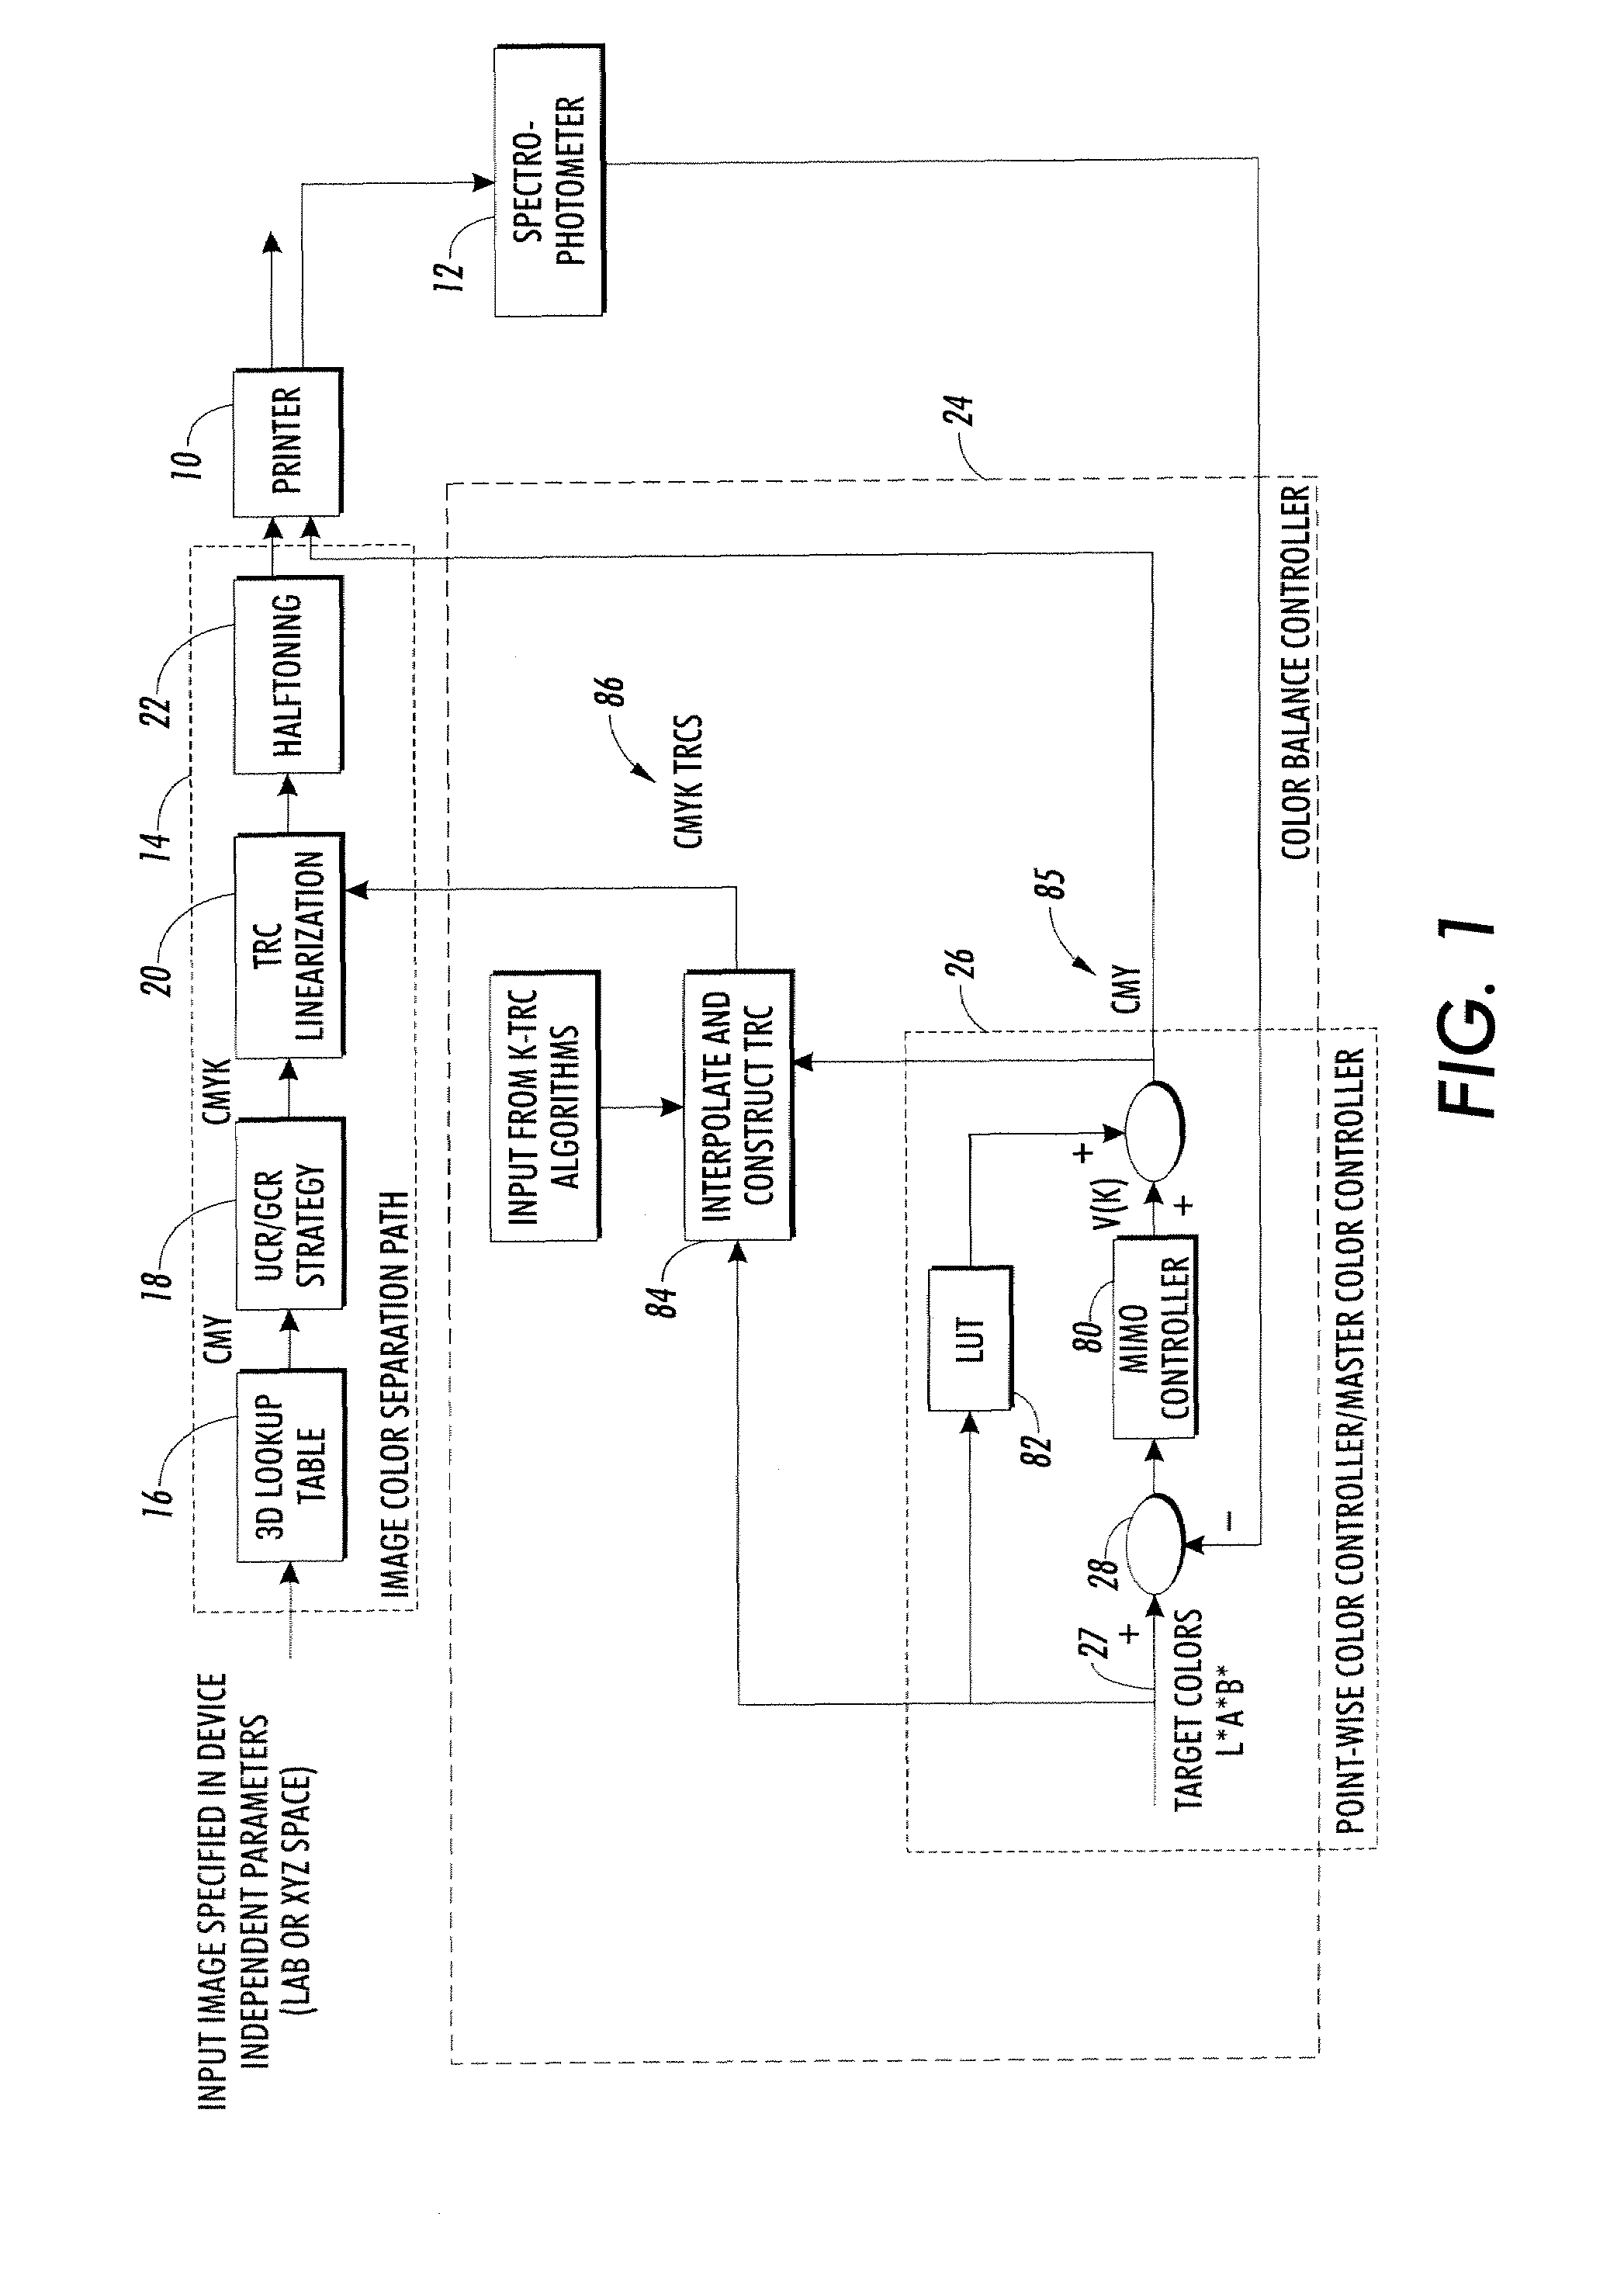 On-line calibration system for a dynamically varying color marking device